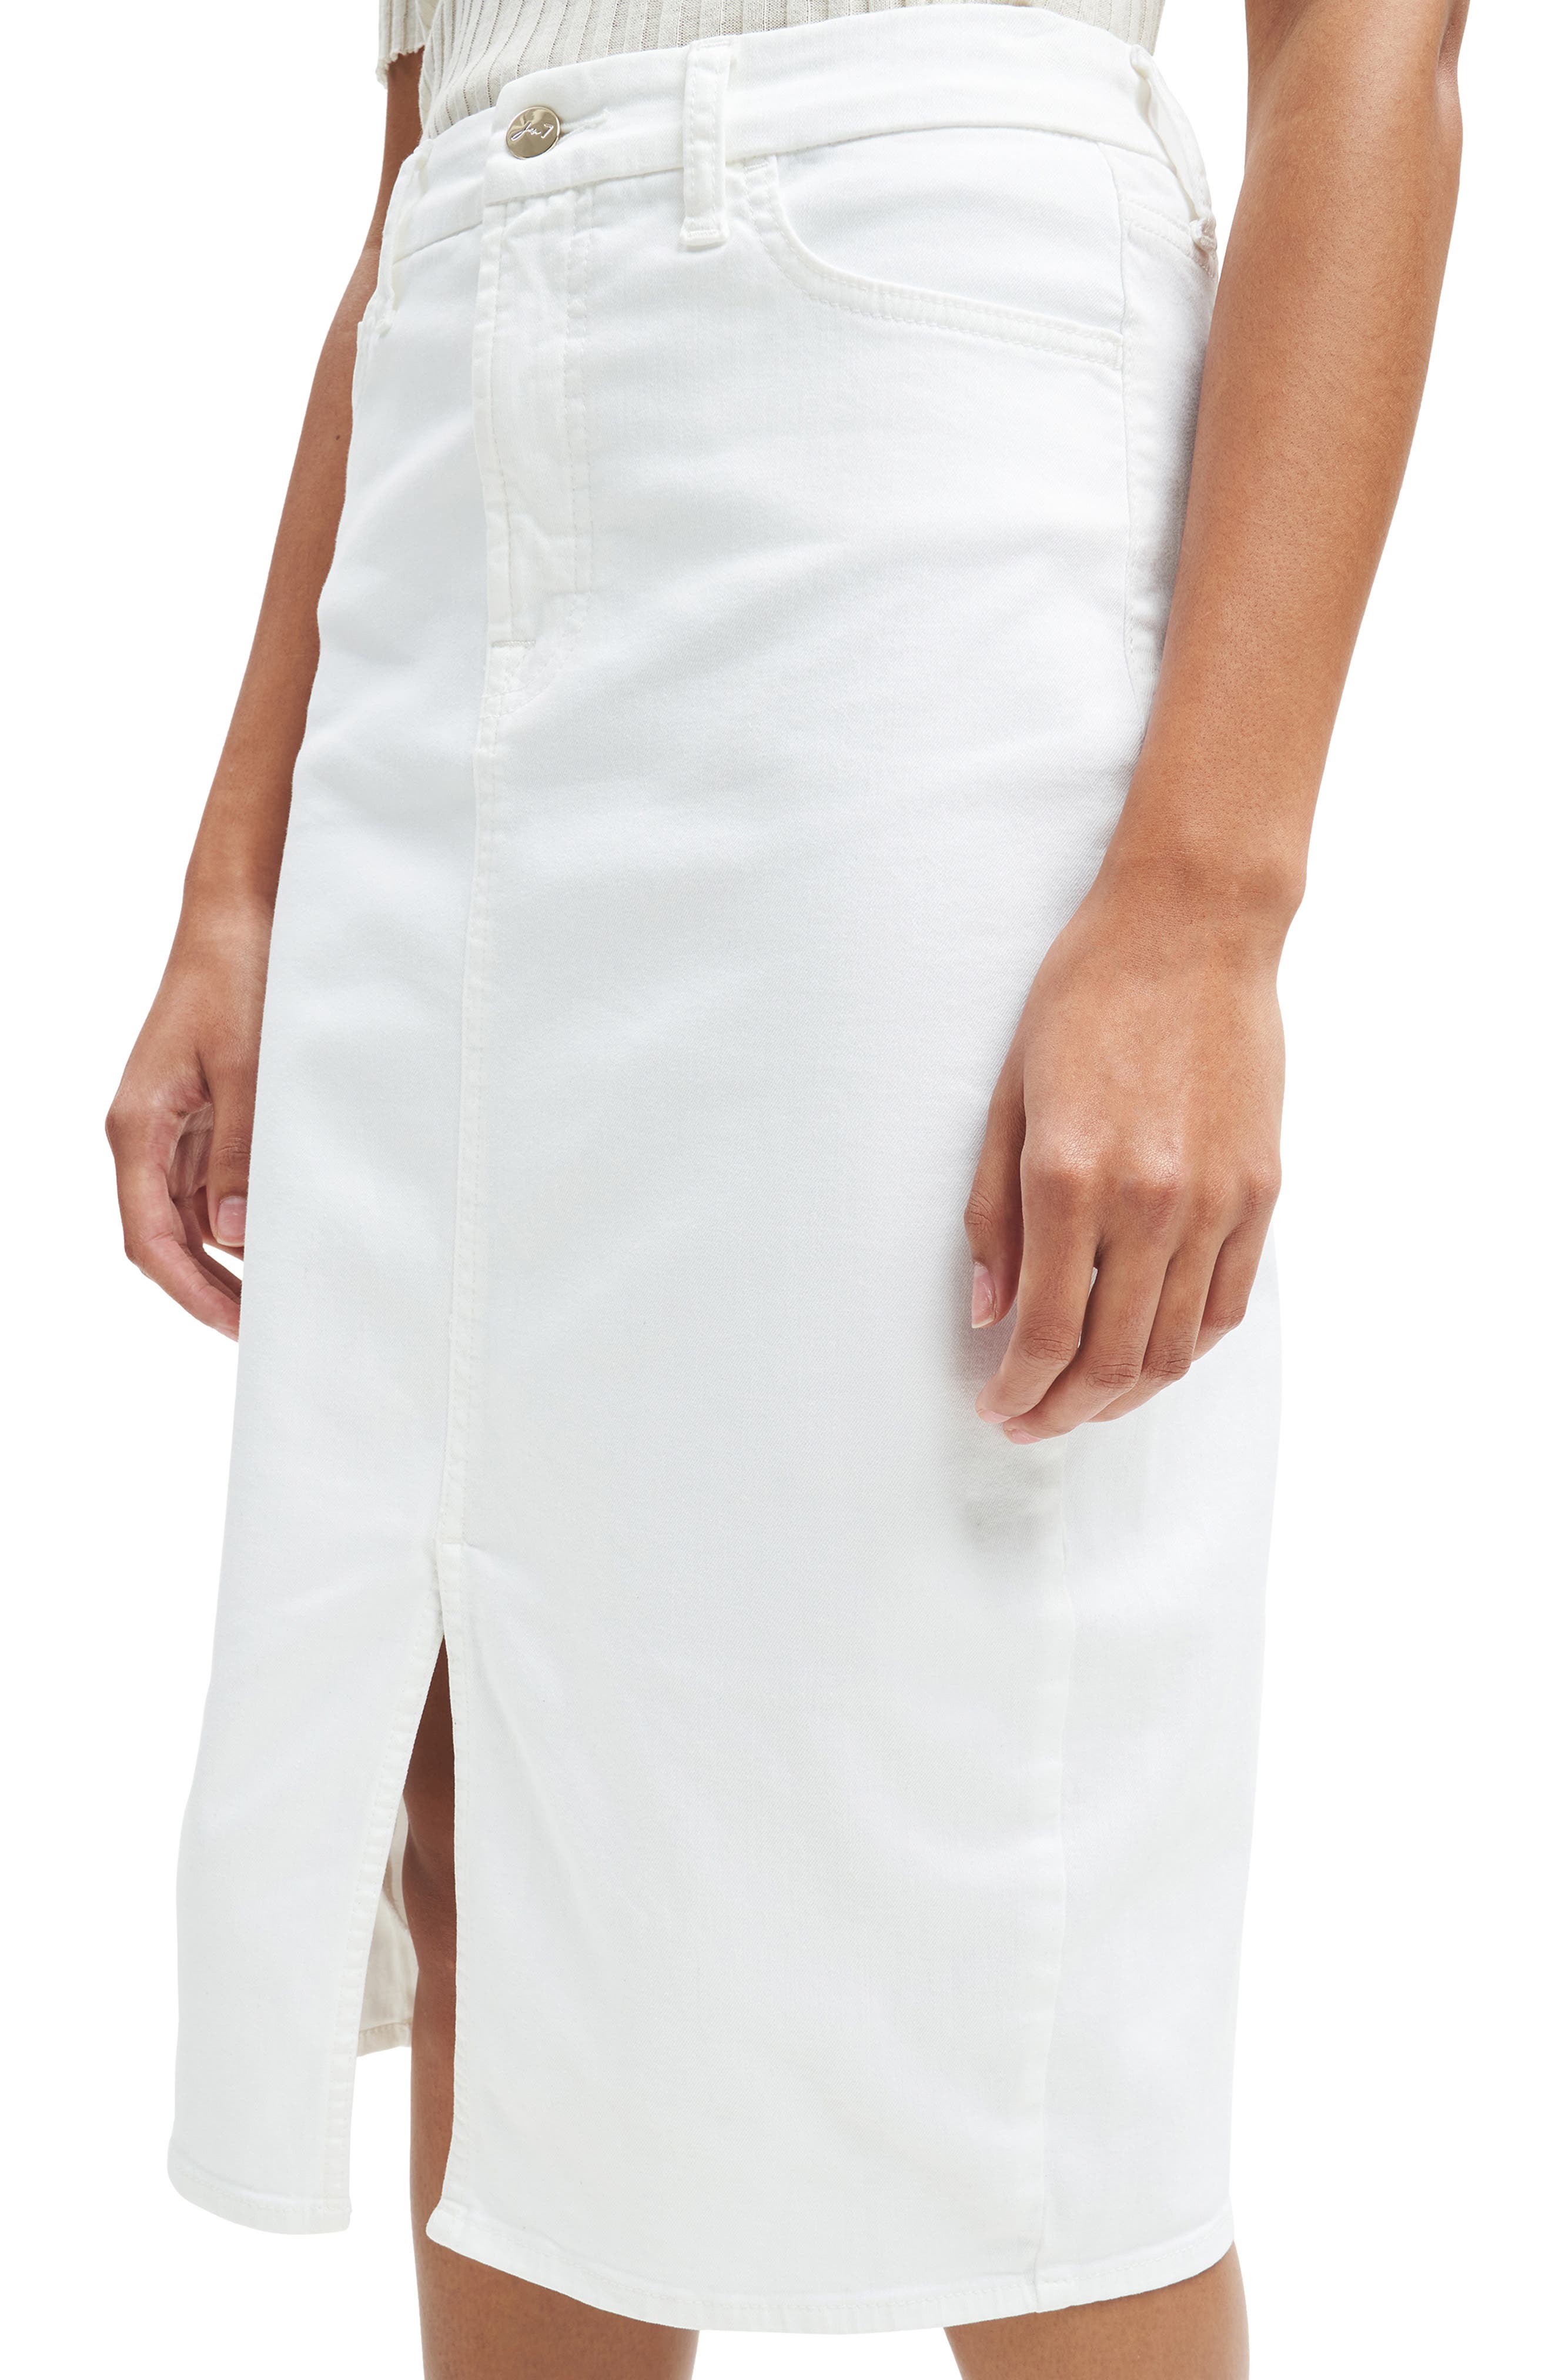 NWT Size 12 Women’s Seven 7 Jeans Embroidered White Denim Skirt NEW MSRP $59 